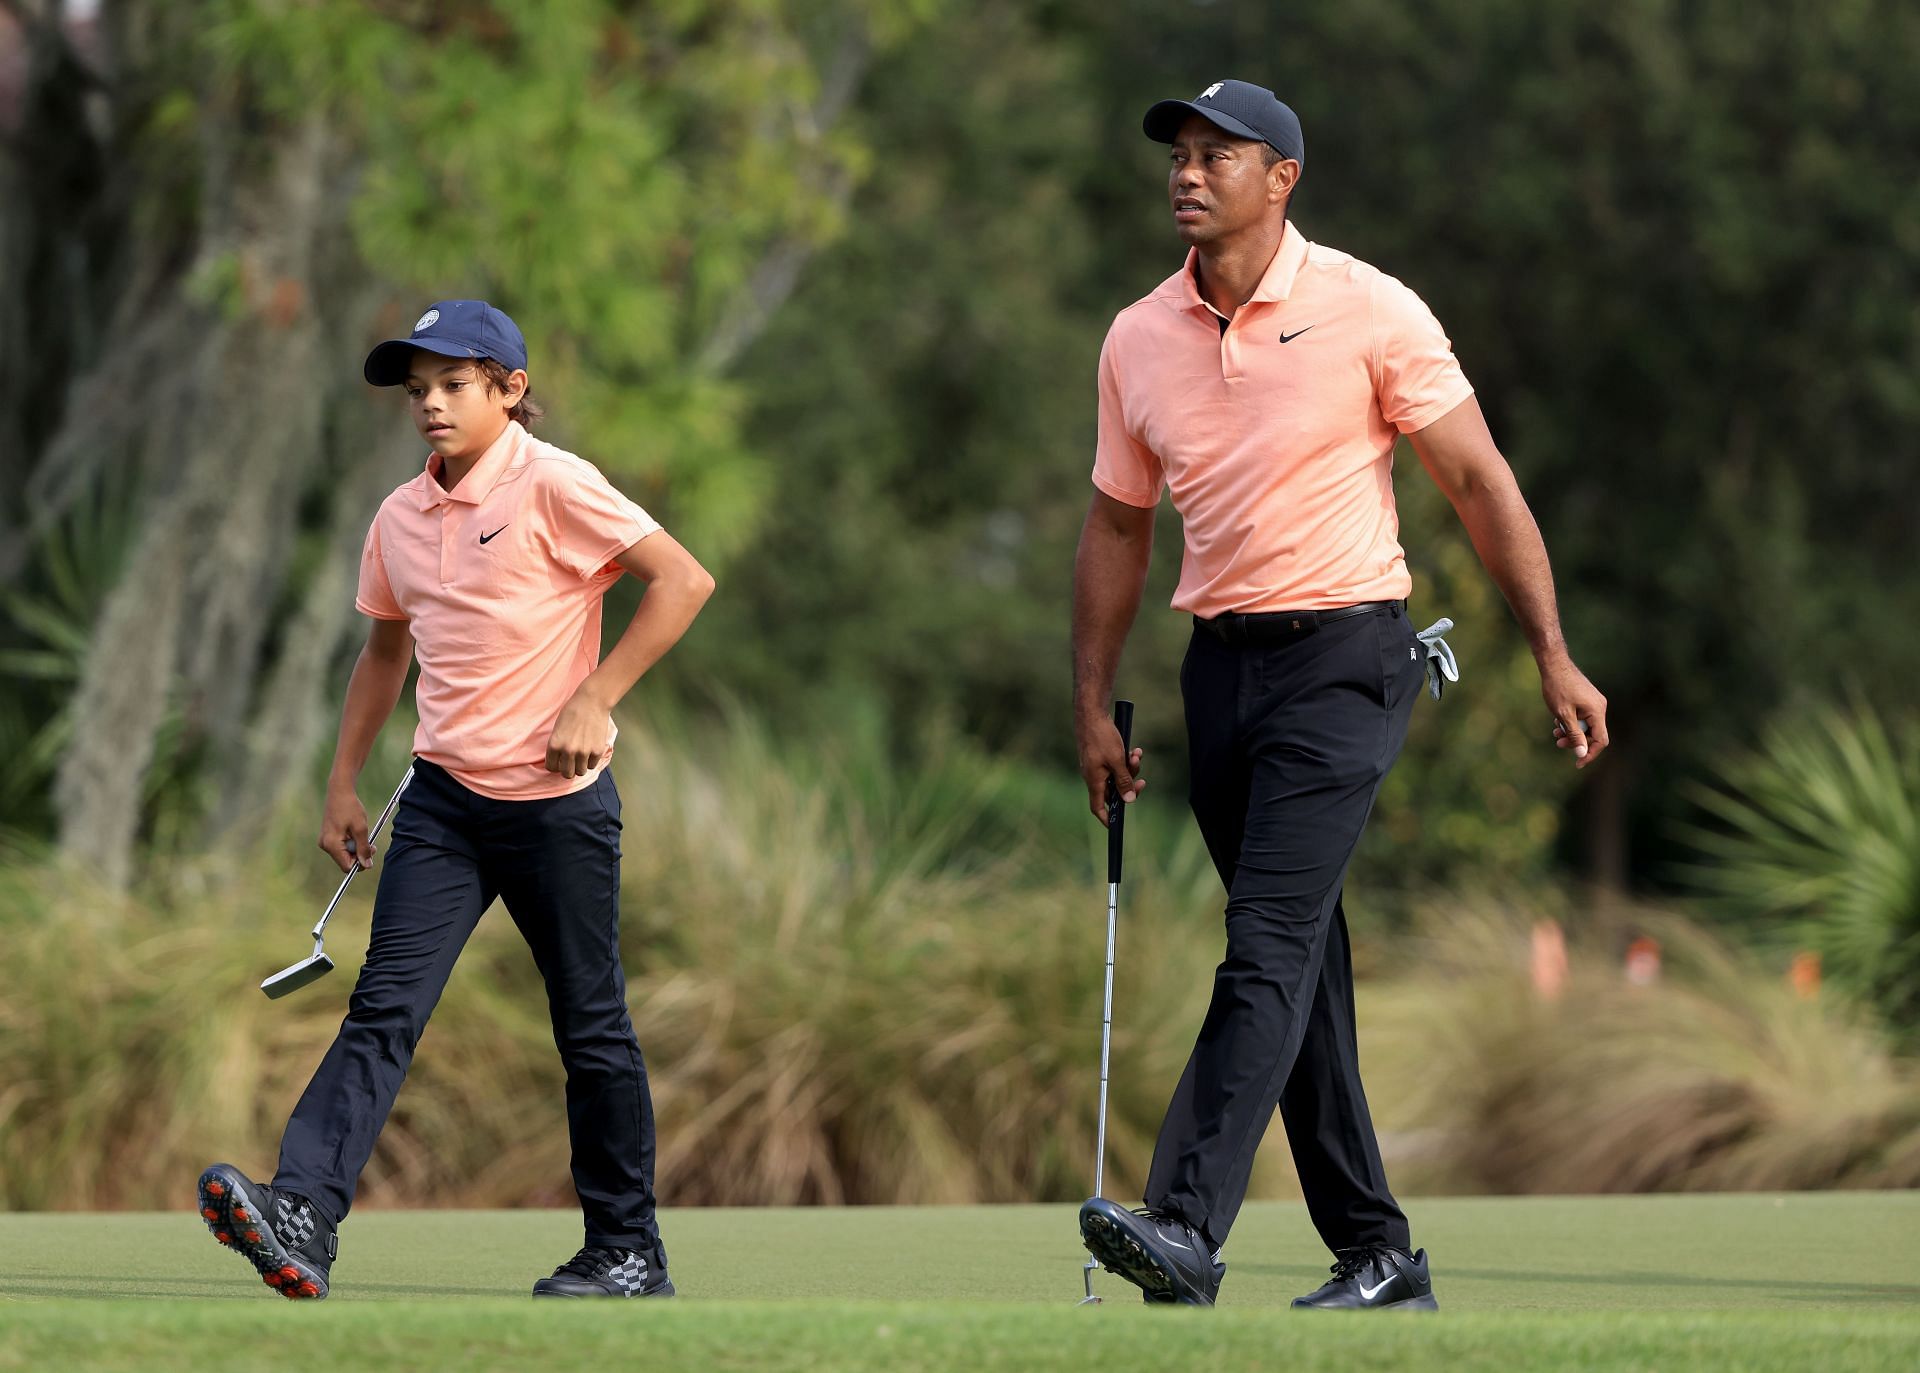 “Can the kid play on his own..” – Fans react to a Reddit image of Tiger ...